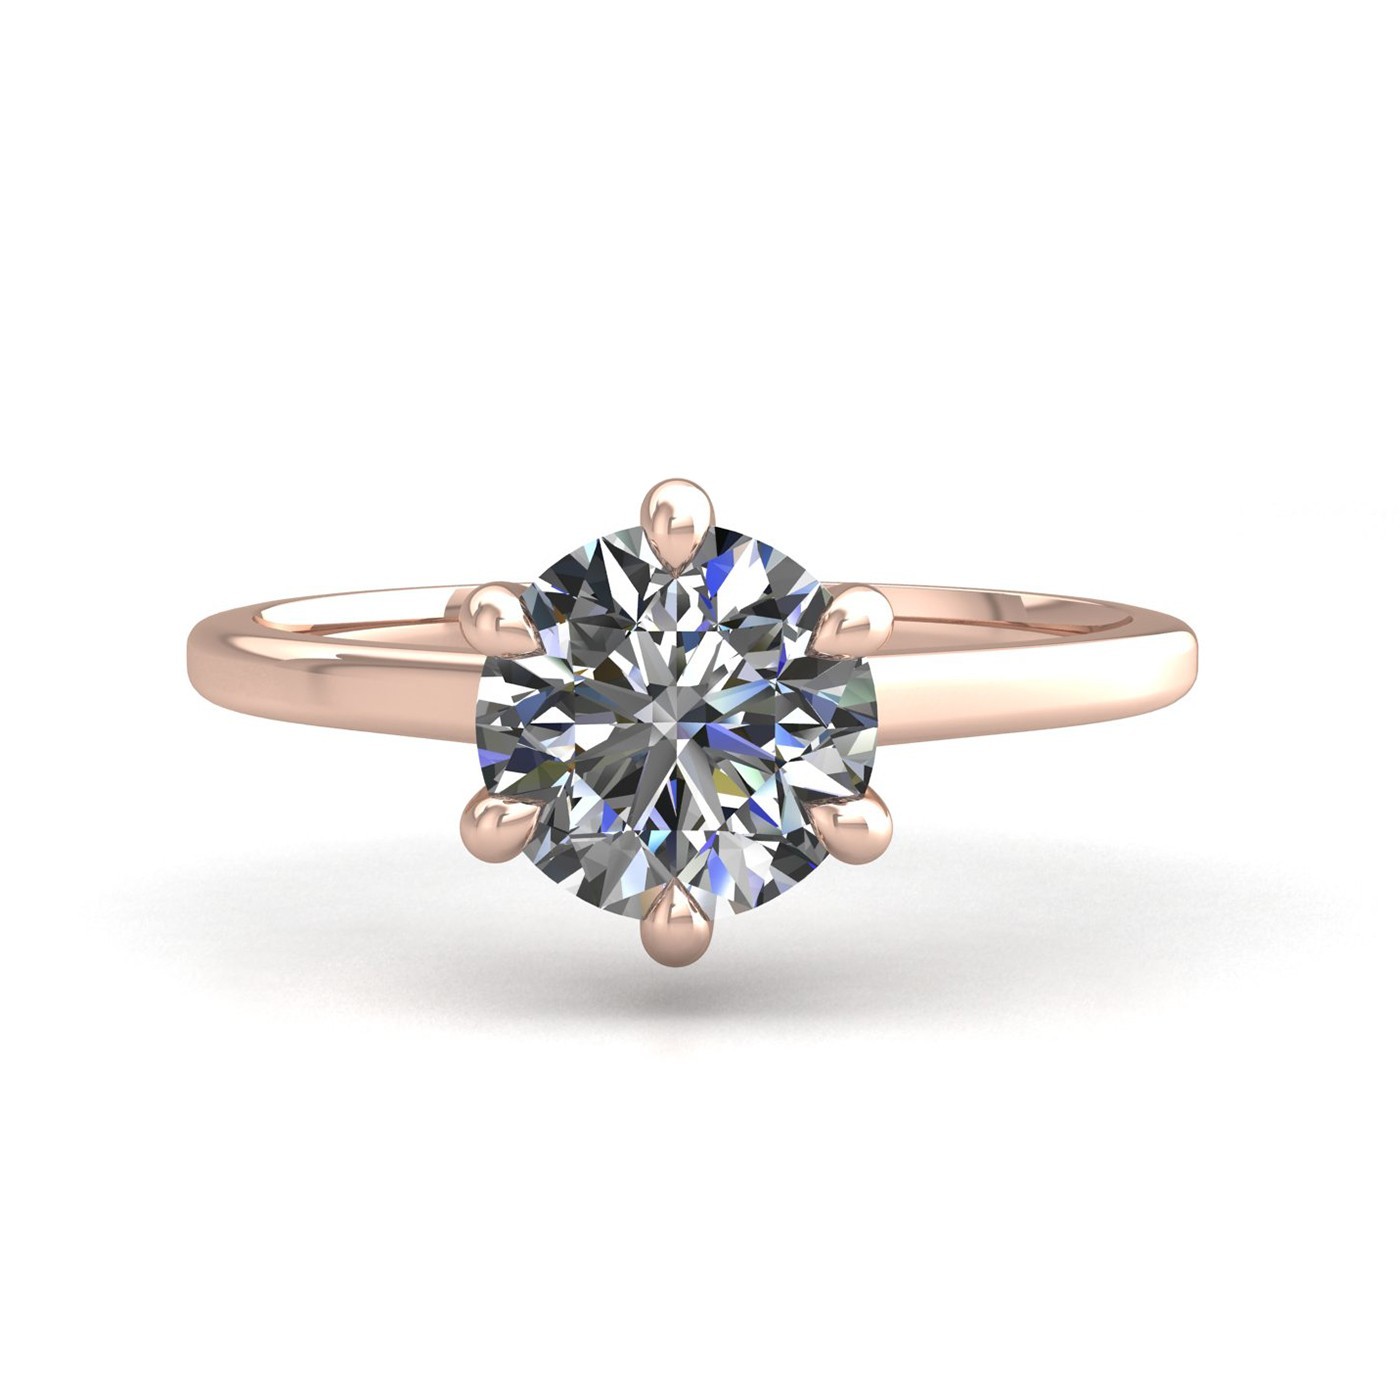 18k rose gold 2,00 ct 6 prongs solitaire round cut diamond engagement ring with whisper thin band Photos & images